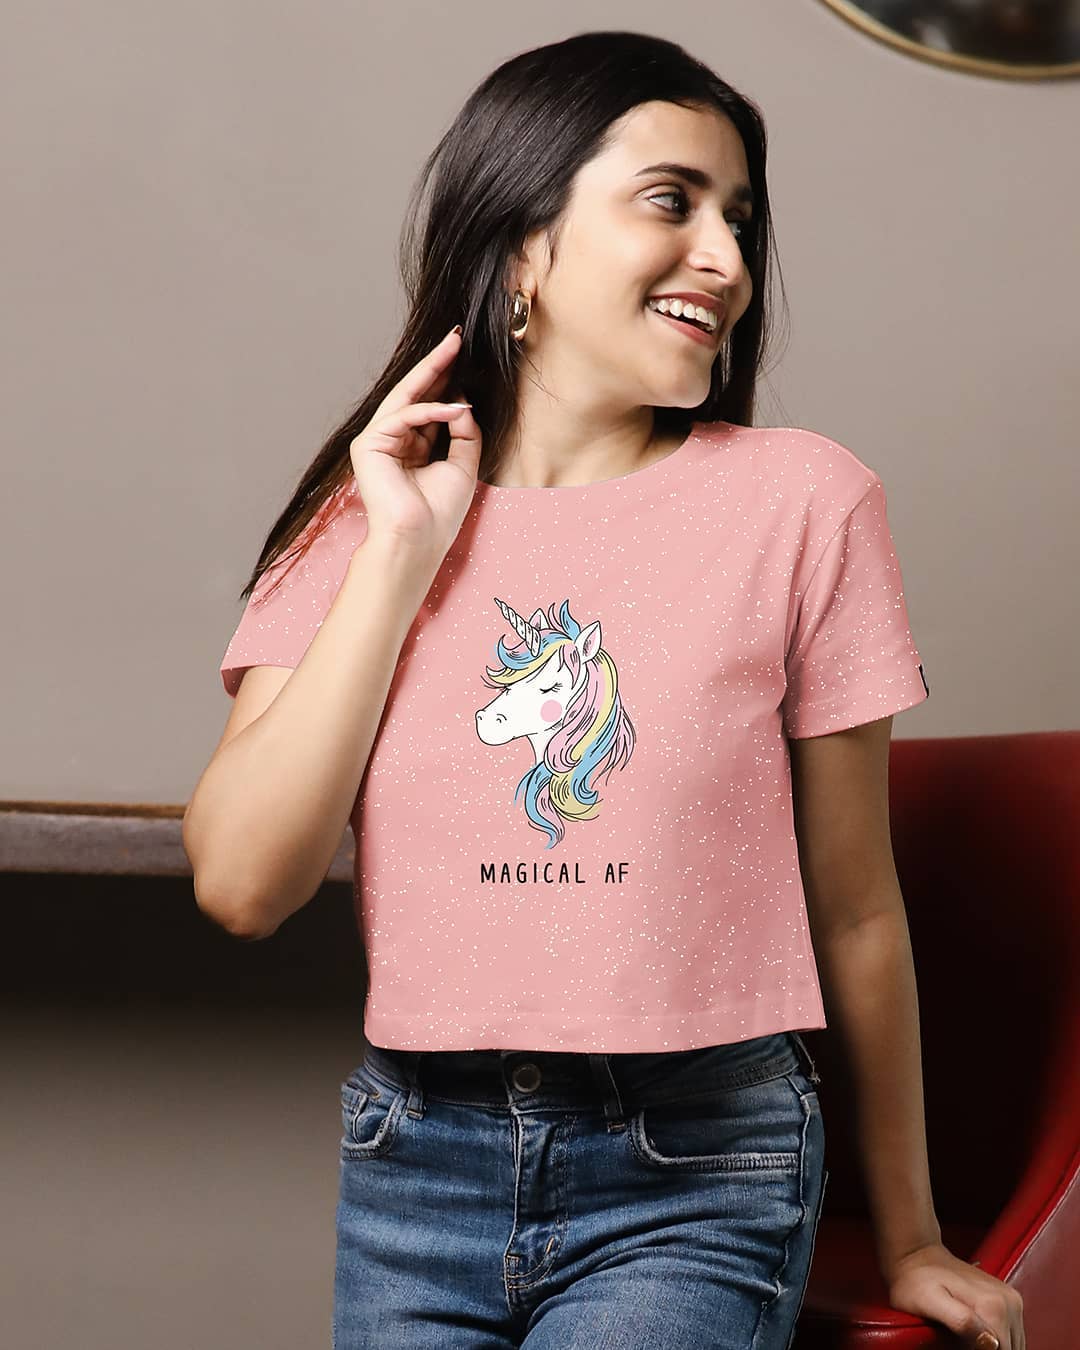 The Souled Store - We let our clothes do the talking. 

#thesouledstore #instastyle #instafashion #express #fashionstyle #fandom #celebratefandom #outfits #ootd #trending #fashiongoals #lookbook